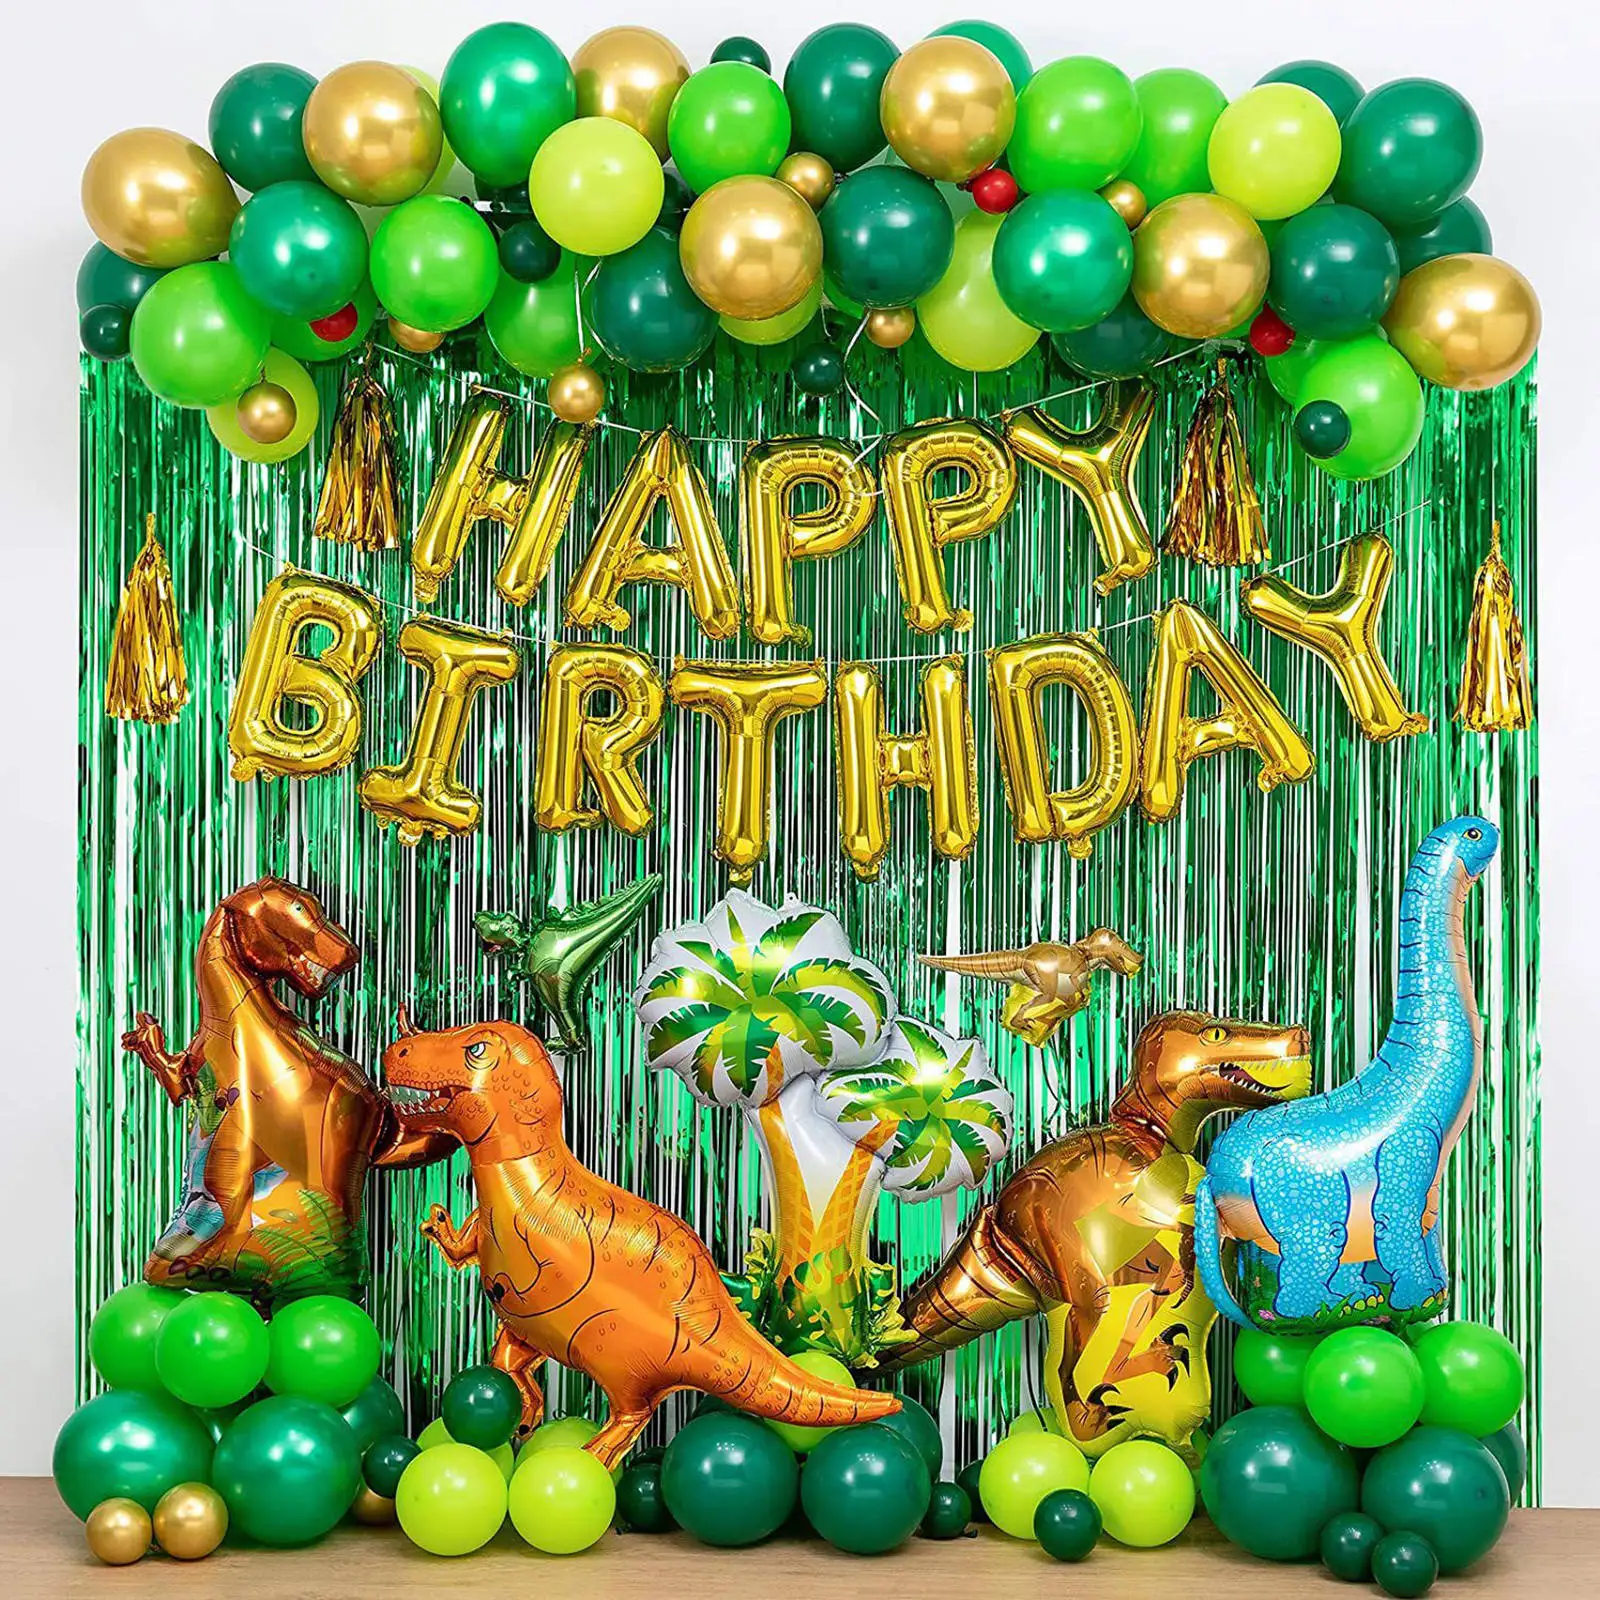 113pc Dinosaur Birthday Party Decoration Balloons Arch Garland Kit Happy Birthday Balloons foil Curtains dino Themed Party Favor